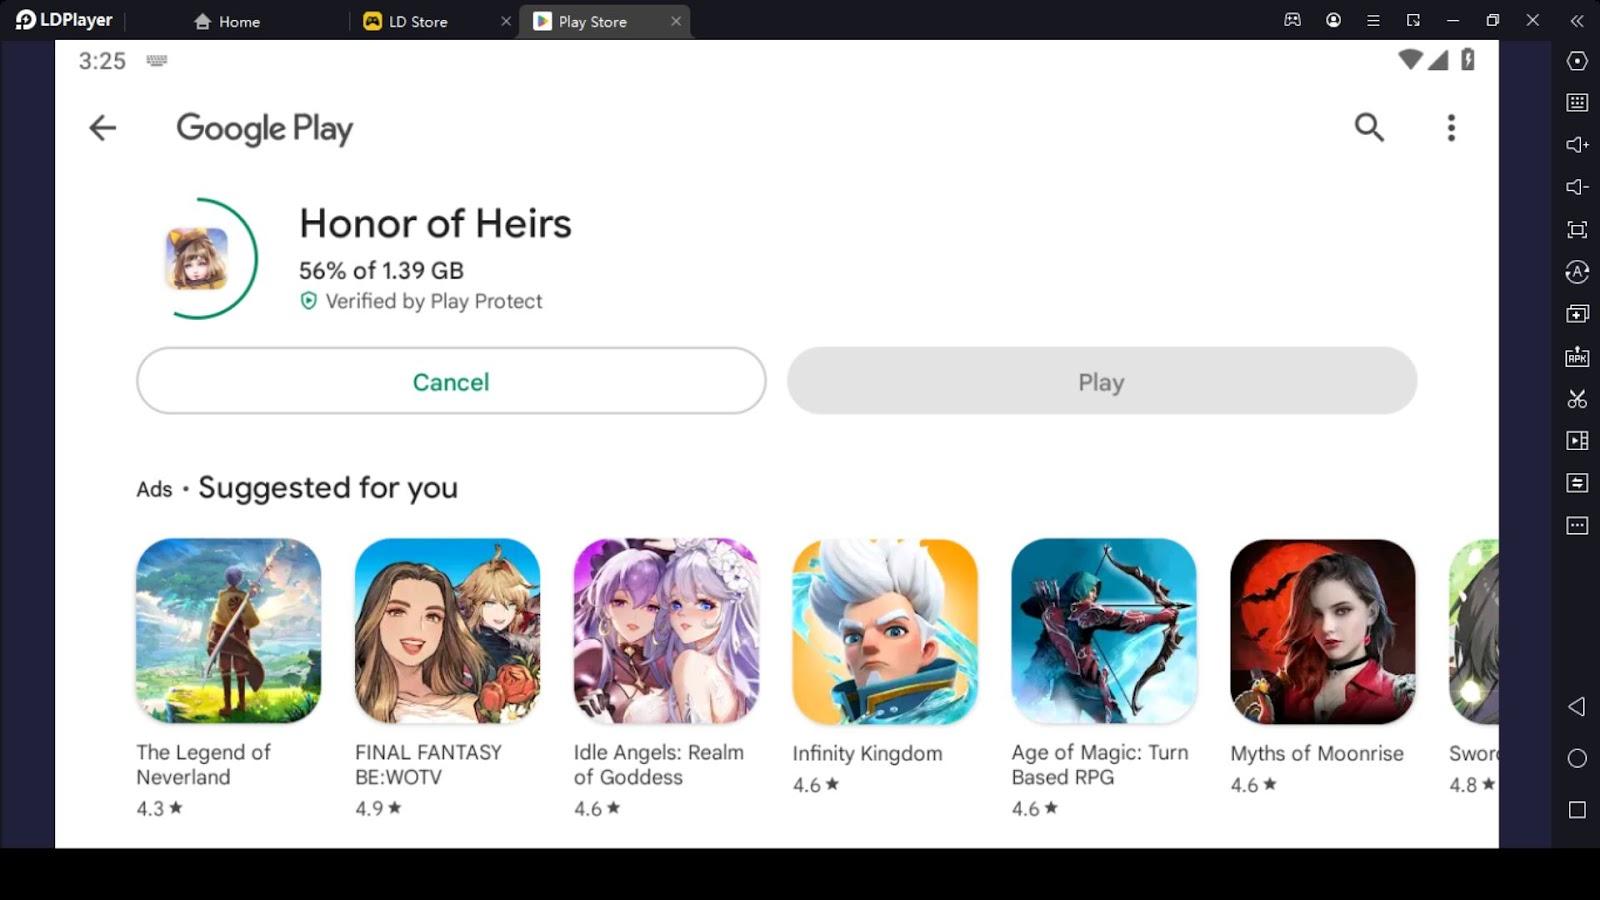 Can We Play Honor of Heires on Your PC